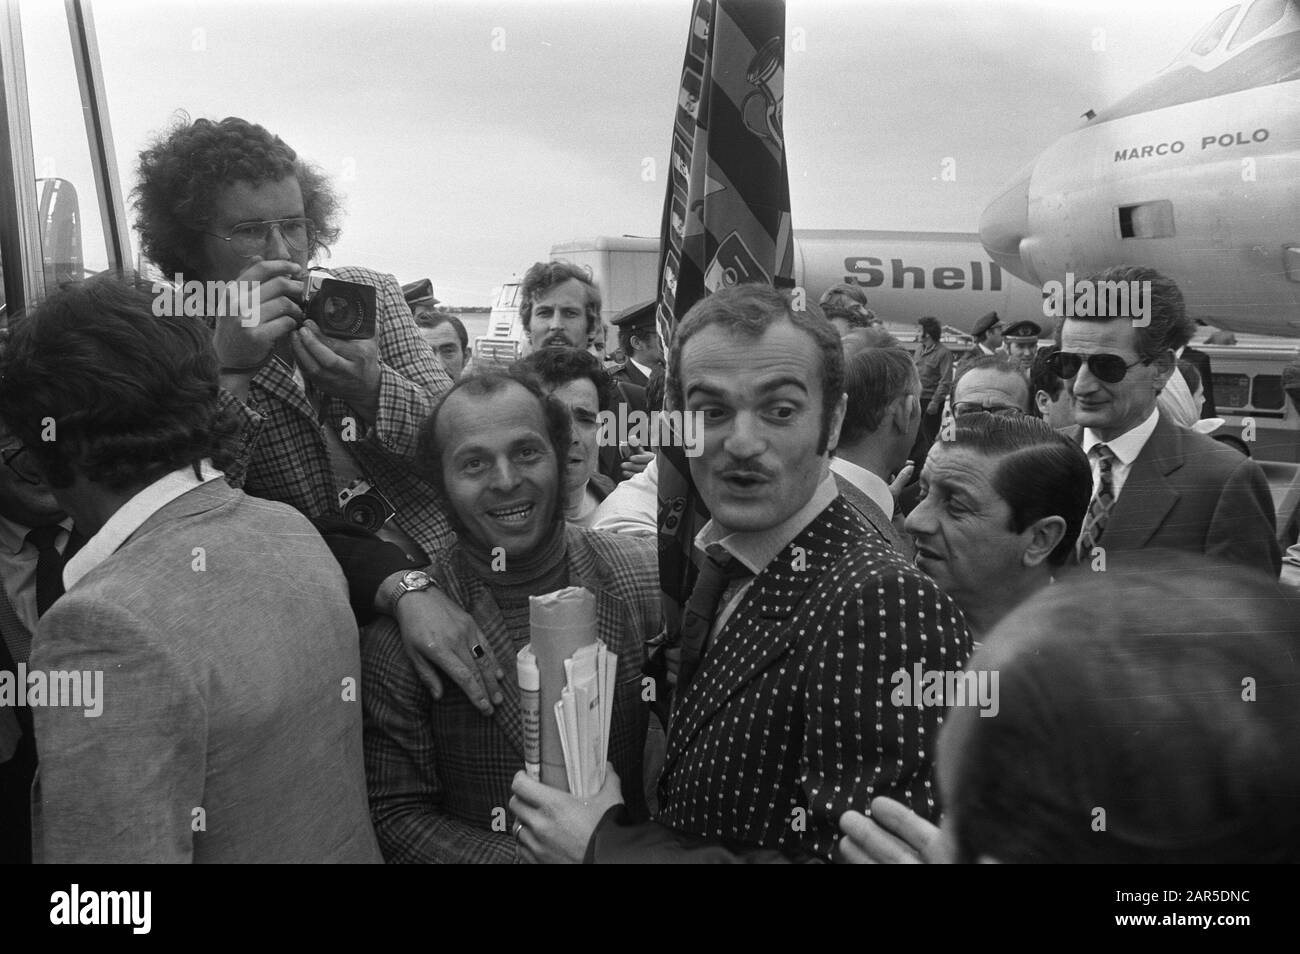 Arrival Inter Milan at Zestienhoven airport for the Europa Cup final against Ajax  Inter Milan footballer Sandro Mazzola with supporters Date: 29 May 1972 Location: Rotterdam, Zuid-Holland Keywords: arrival and departure, sport, supporters, airports, football Personal name: Mazzola, Sandro Institution name: Europa Cup, Inter Milan, Zestienhoven Stock Photo